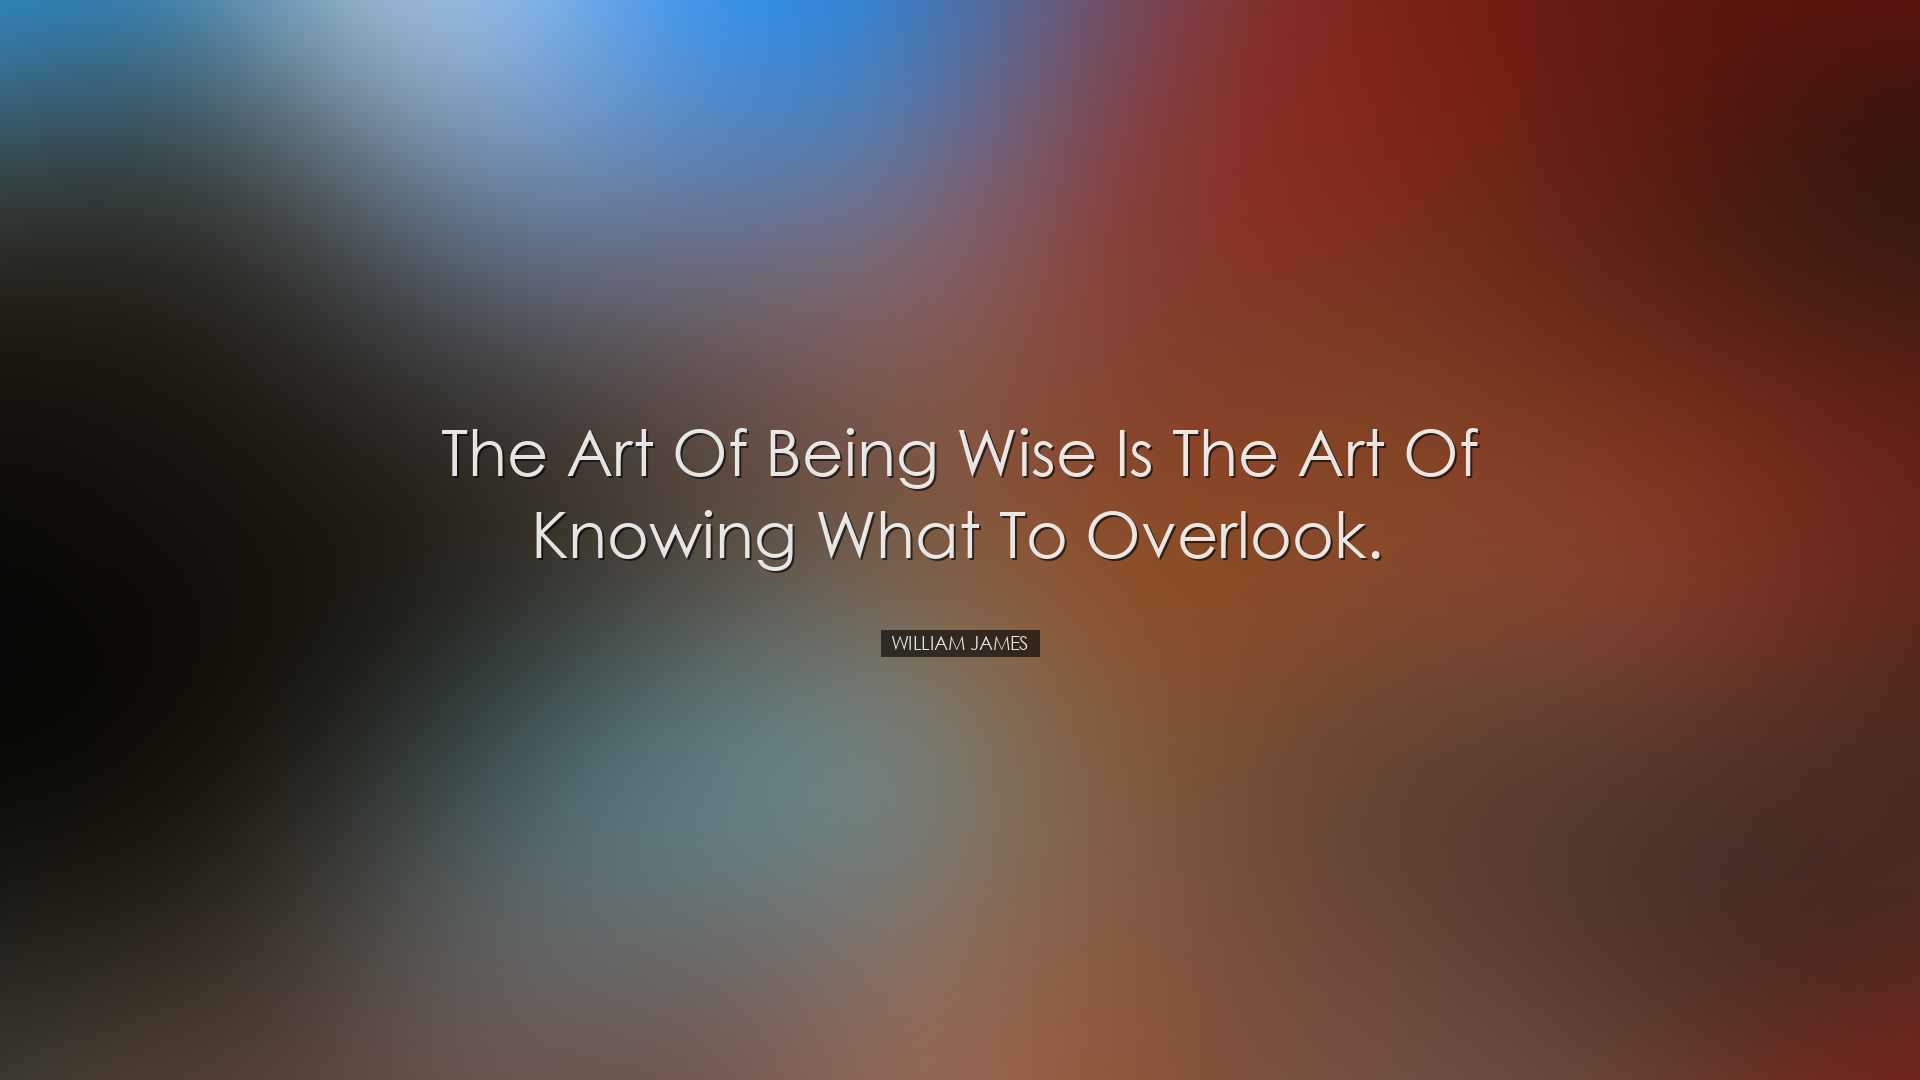 The art of being wise is the art of knowing what to overlook. - Wi